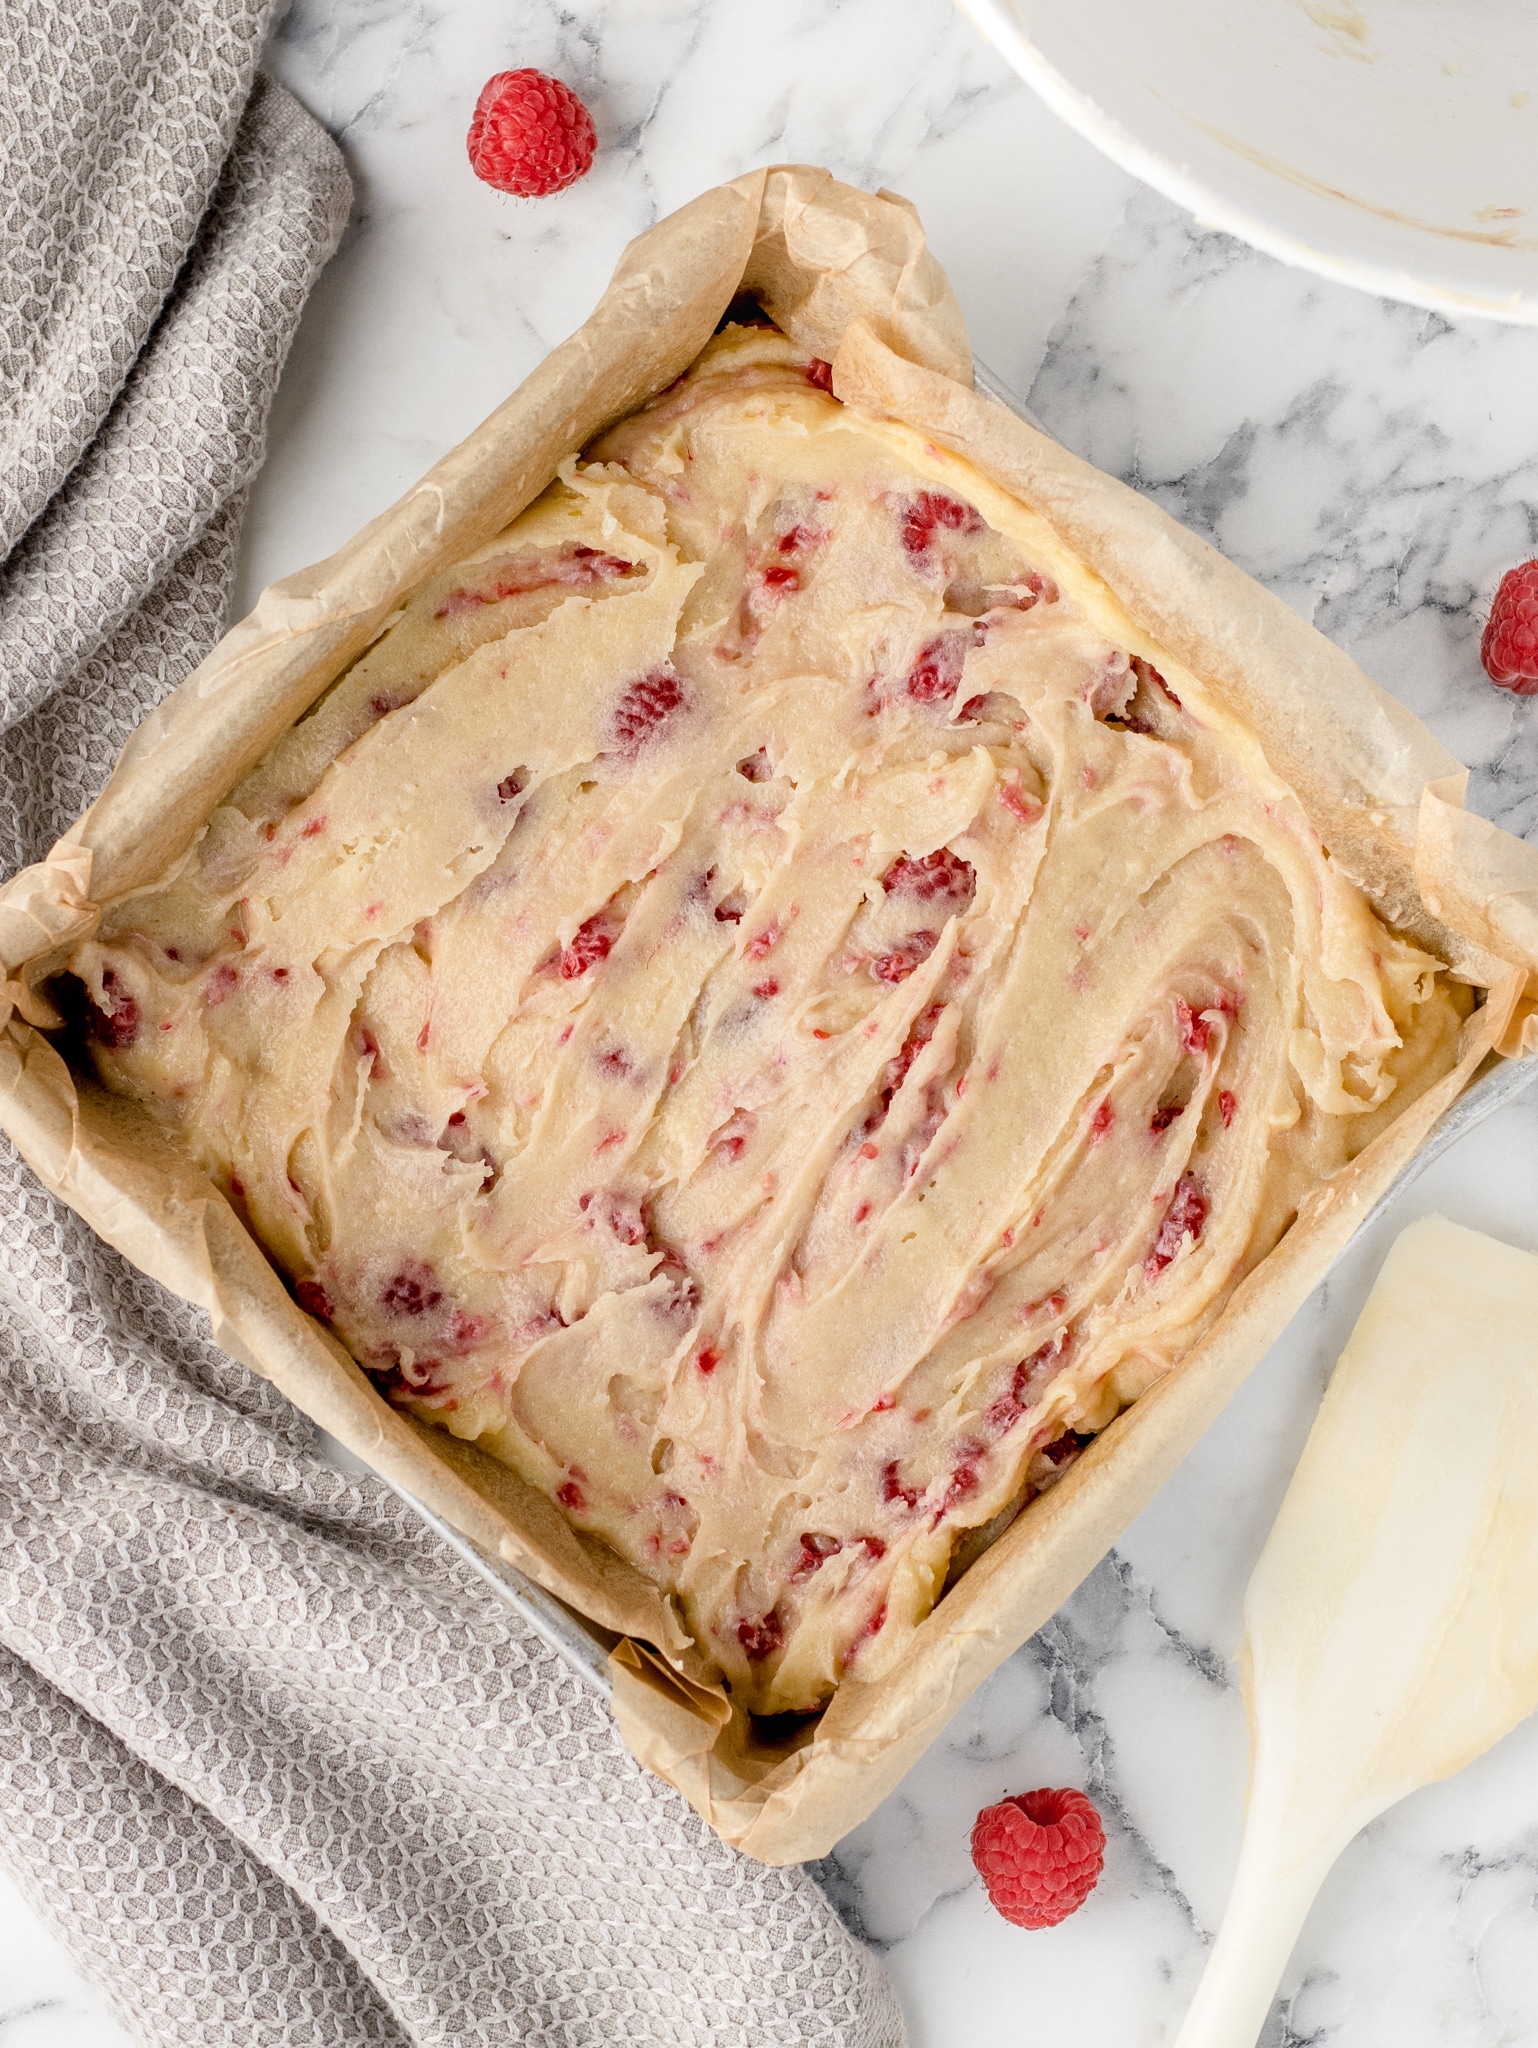 Raspberry White Chocolate Blondies ready to be baked.